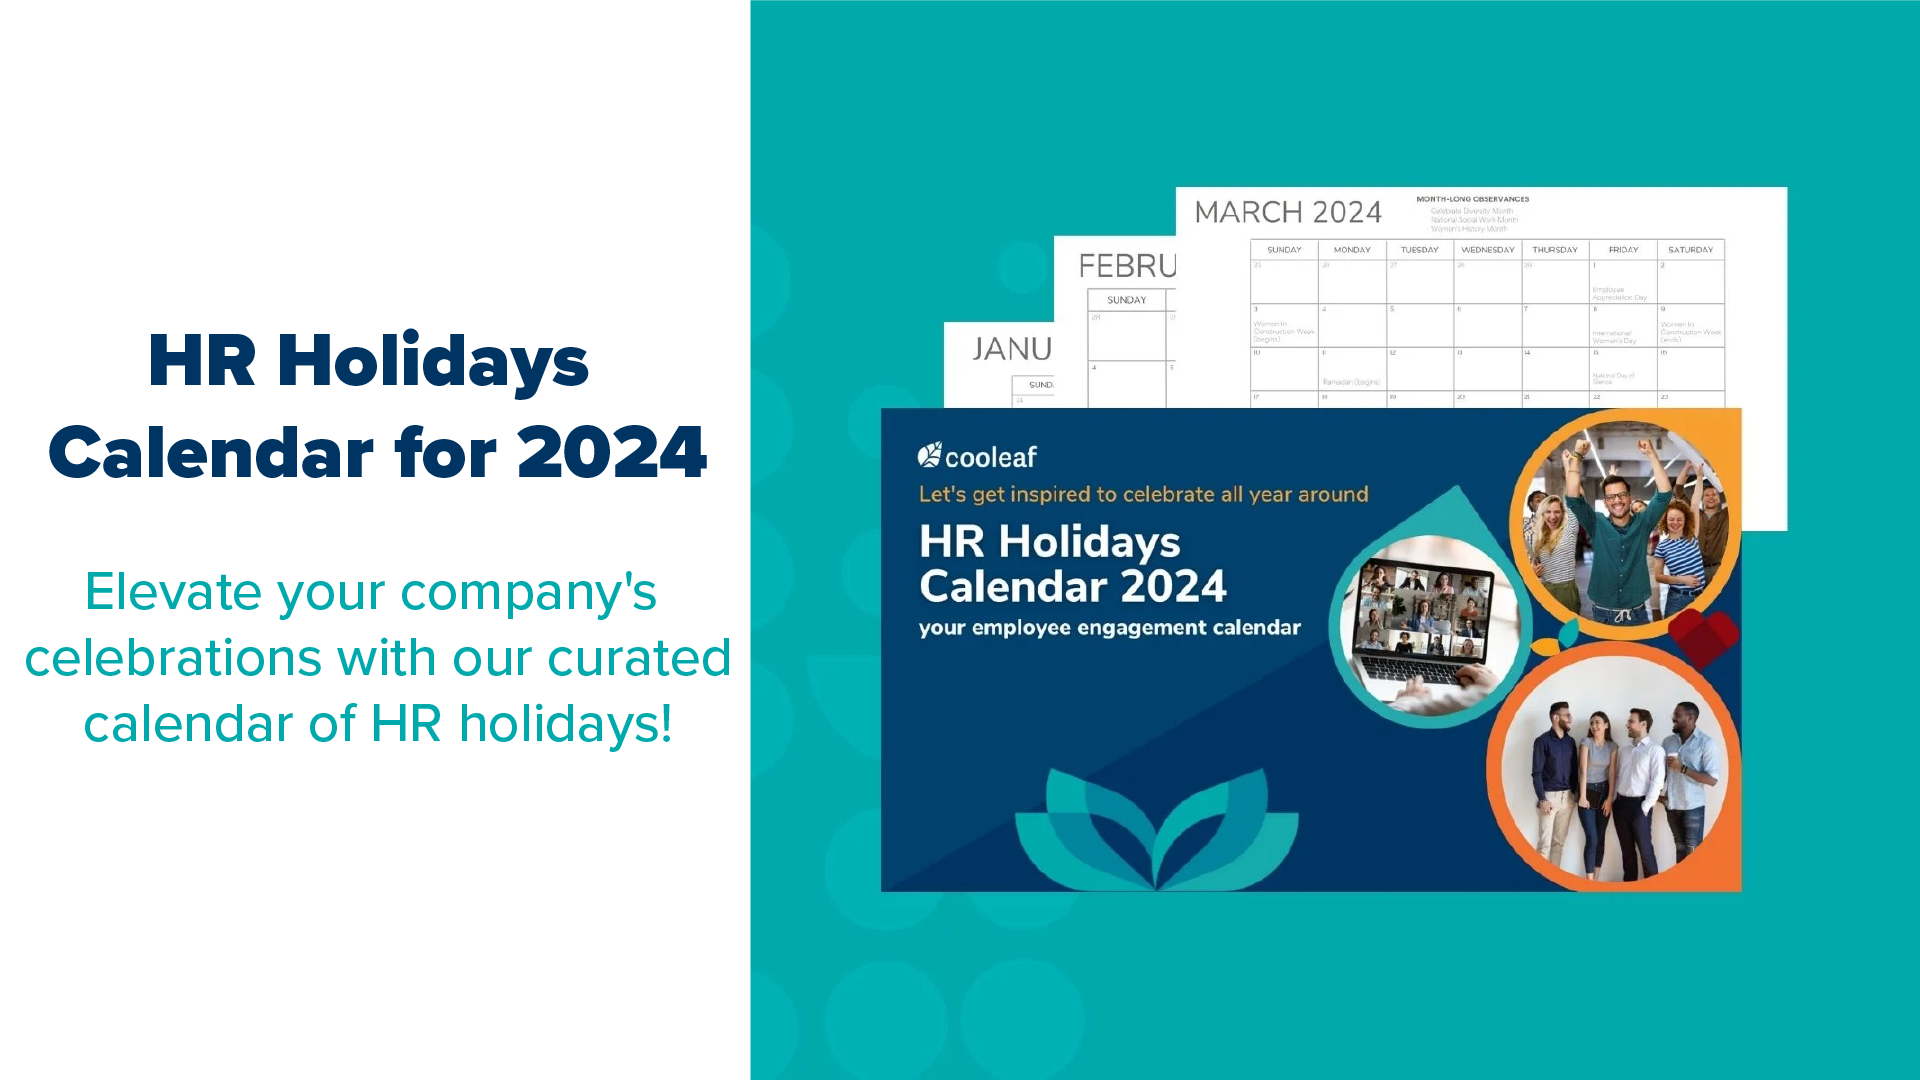 30 Key Dates for Your 2024 HR Holiday Calendar